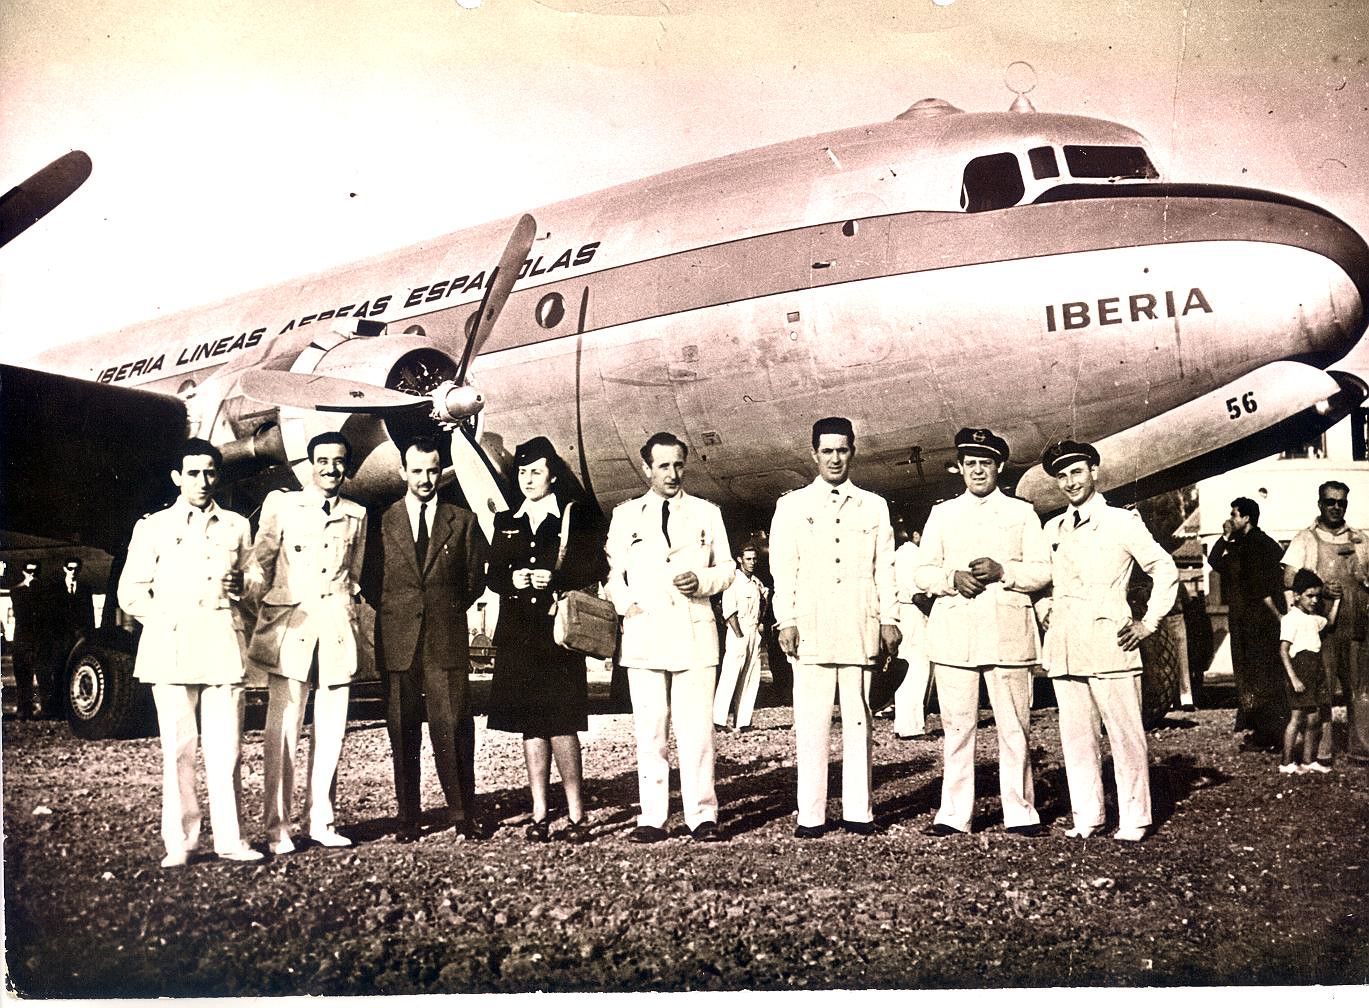 Crew in front of old Iberia aircraft 